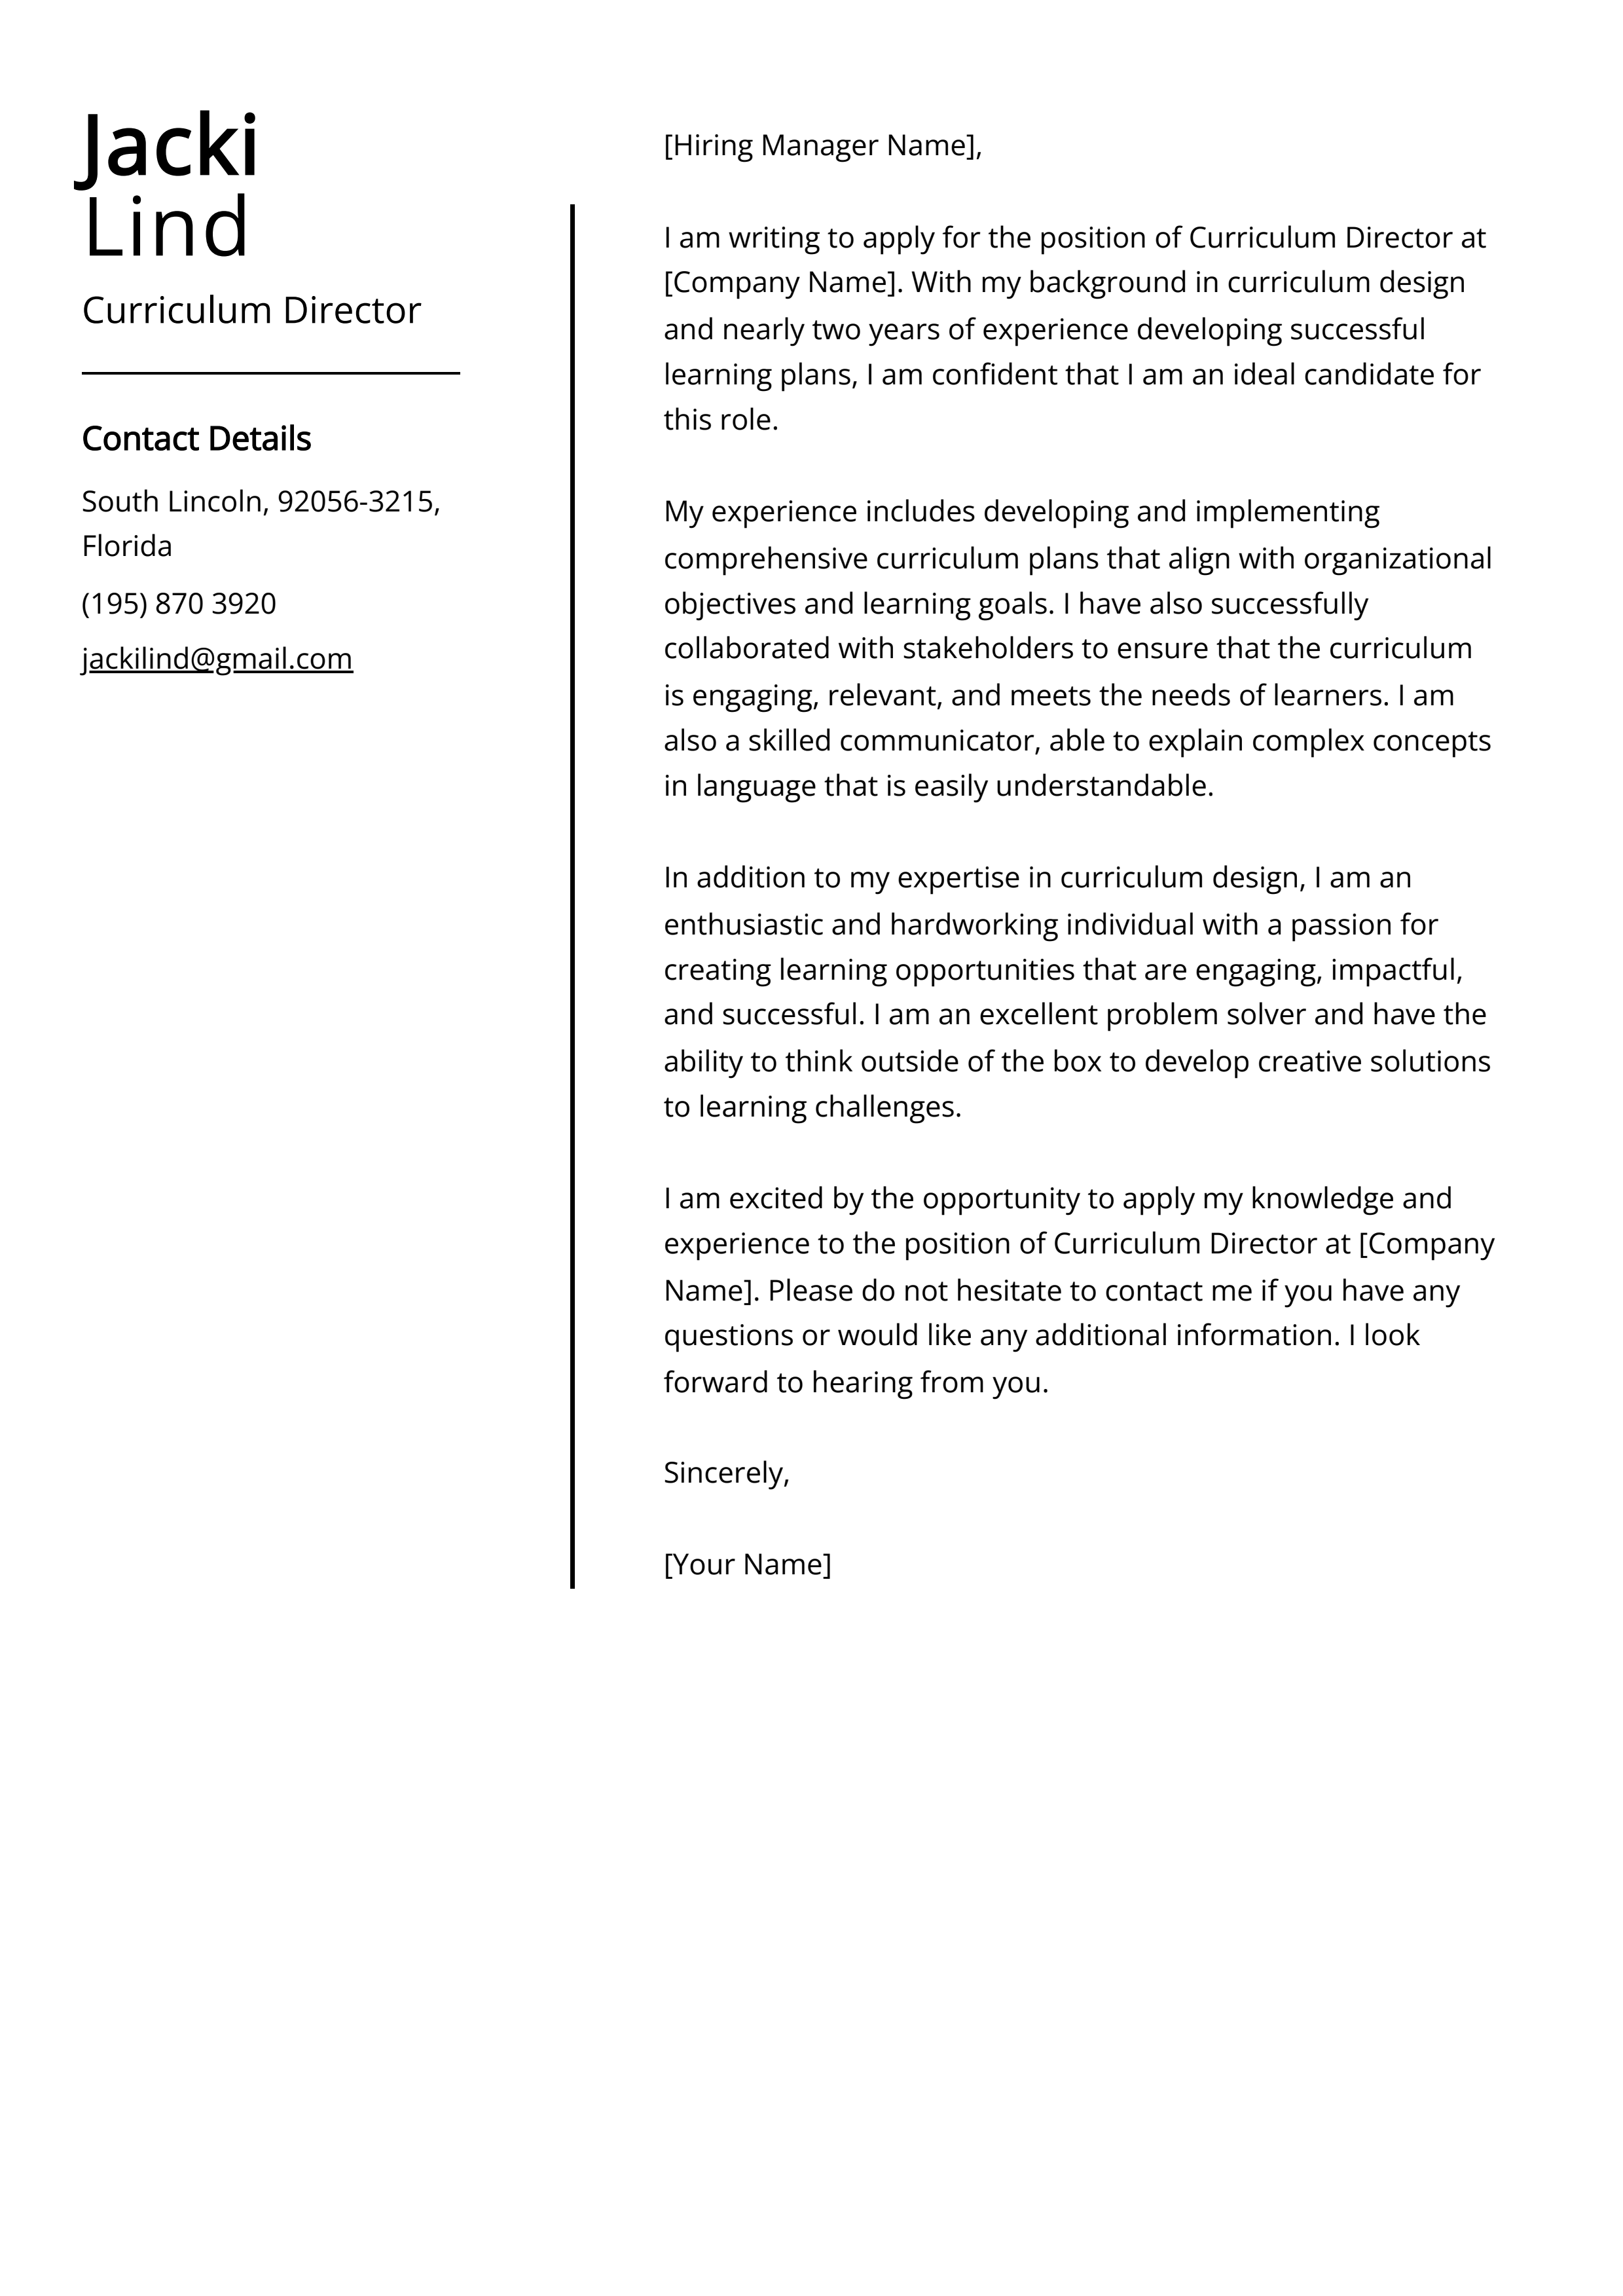 Curriculum Director Cover Letter Example